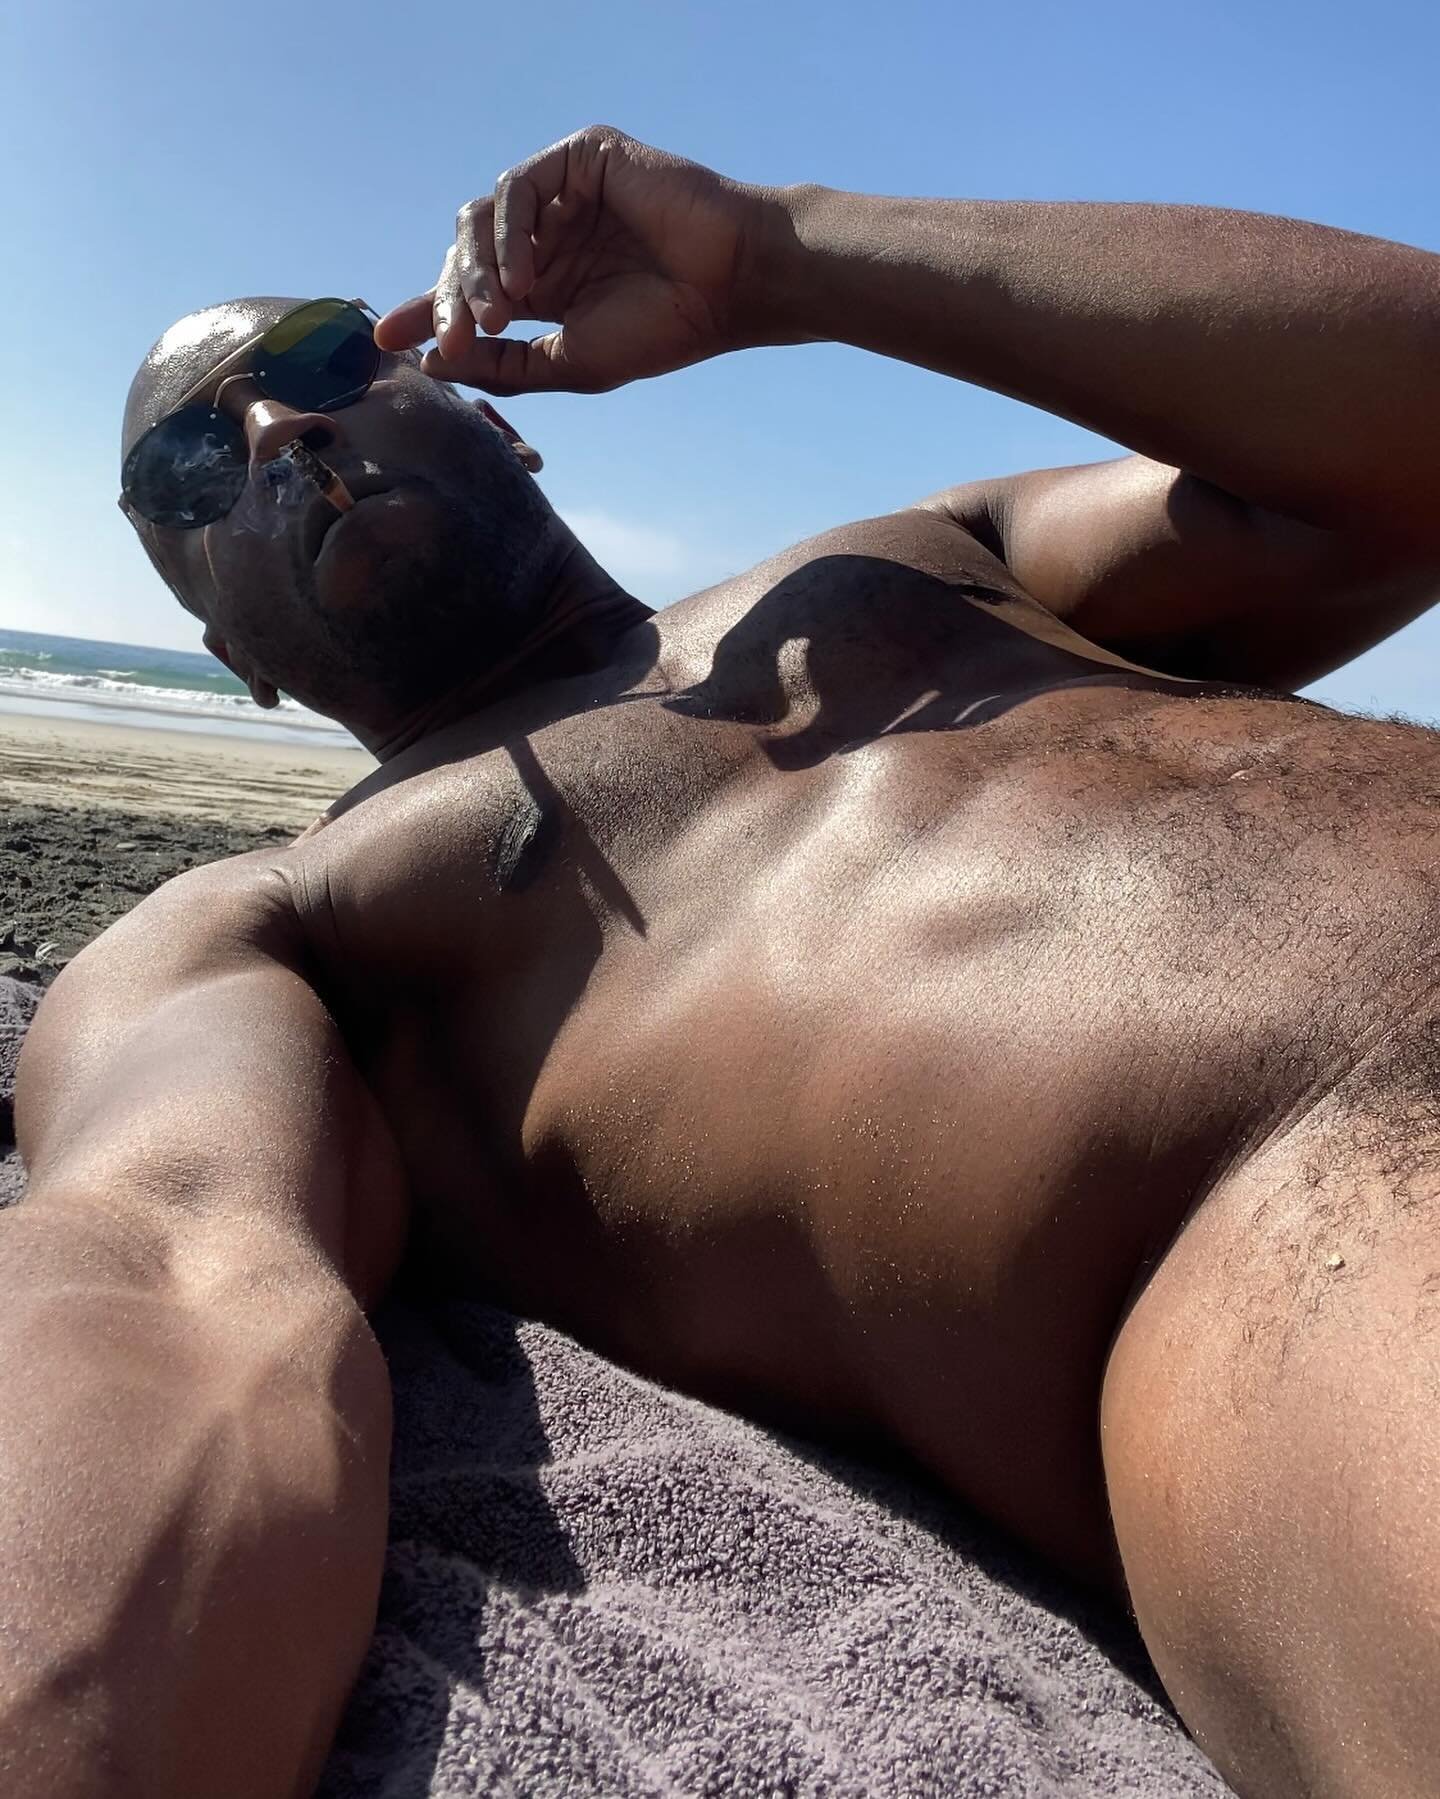 Me on a beach with the boys in Mykonos next month 🥳🙌🏾❤️. Happy 420! LA, Atlanta, DC, NYC, and Mykonos up next. Full schedule below.

We&rsquo;re all out of rooms for Mykonos with 14 guys joining, but there are still a couple discounted sleeping ba